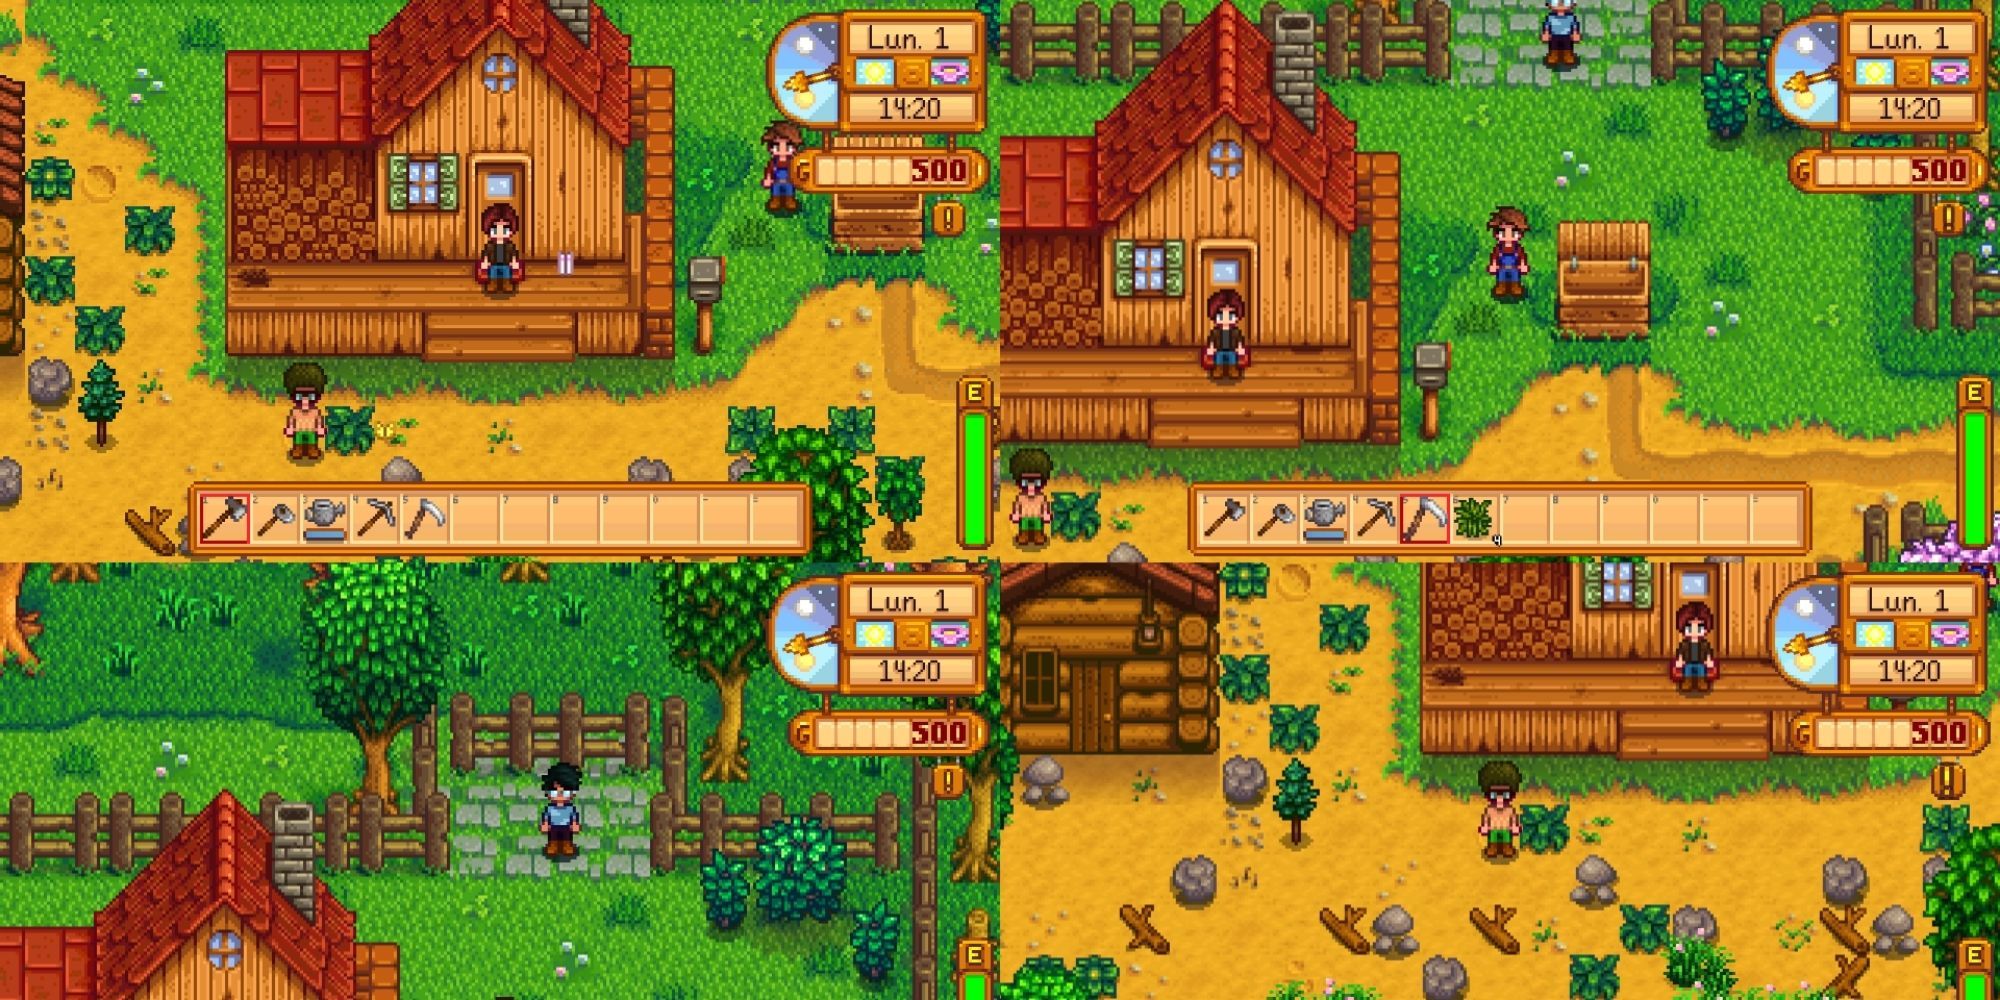 Stardew Valley Split Screen 4 Player (4 Players On A Standard Farm Together) 